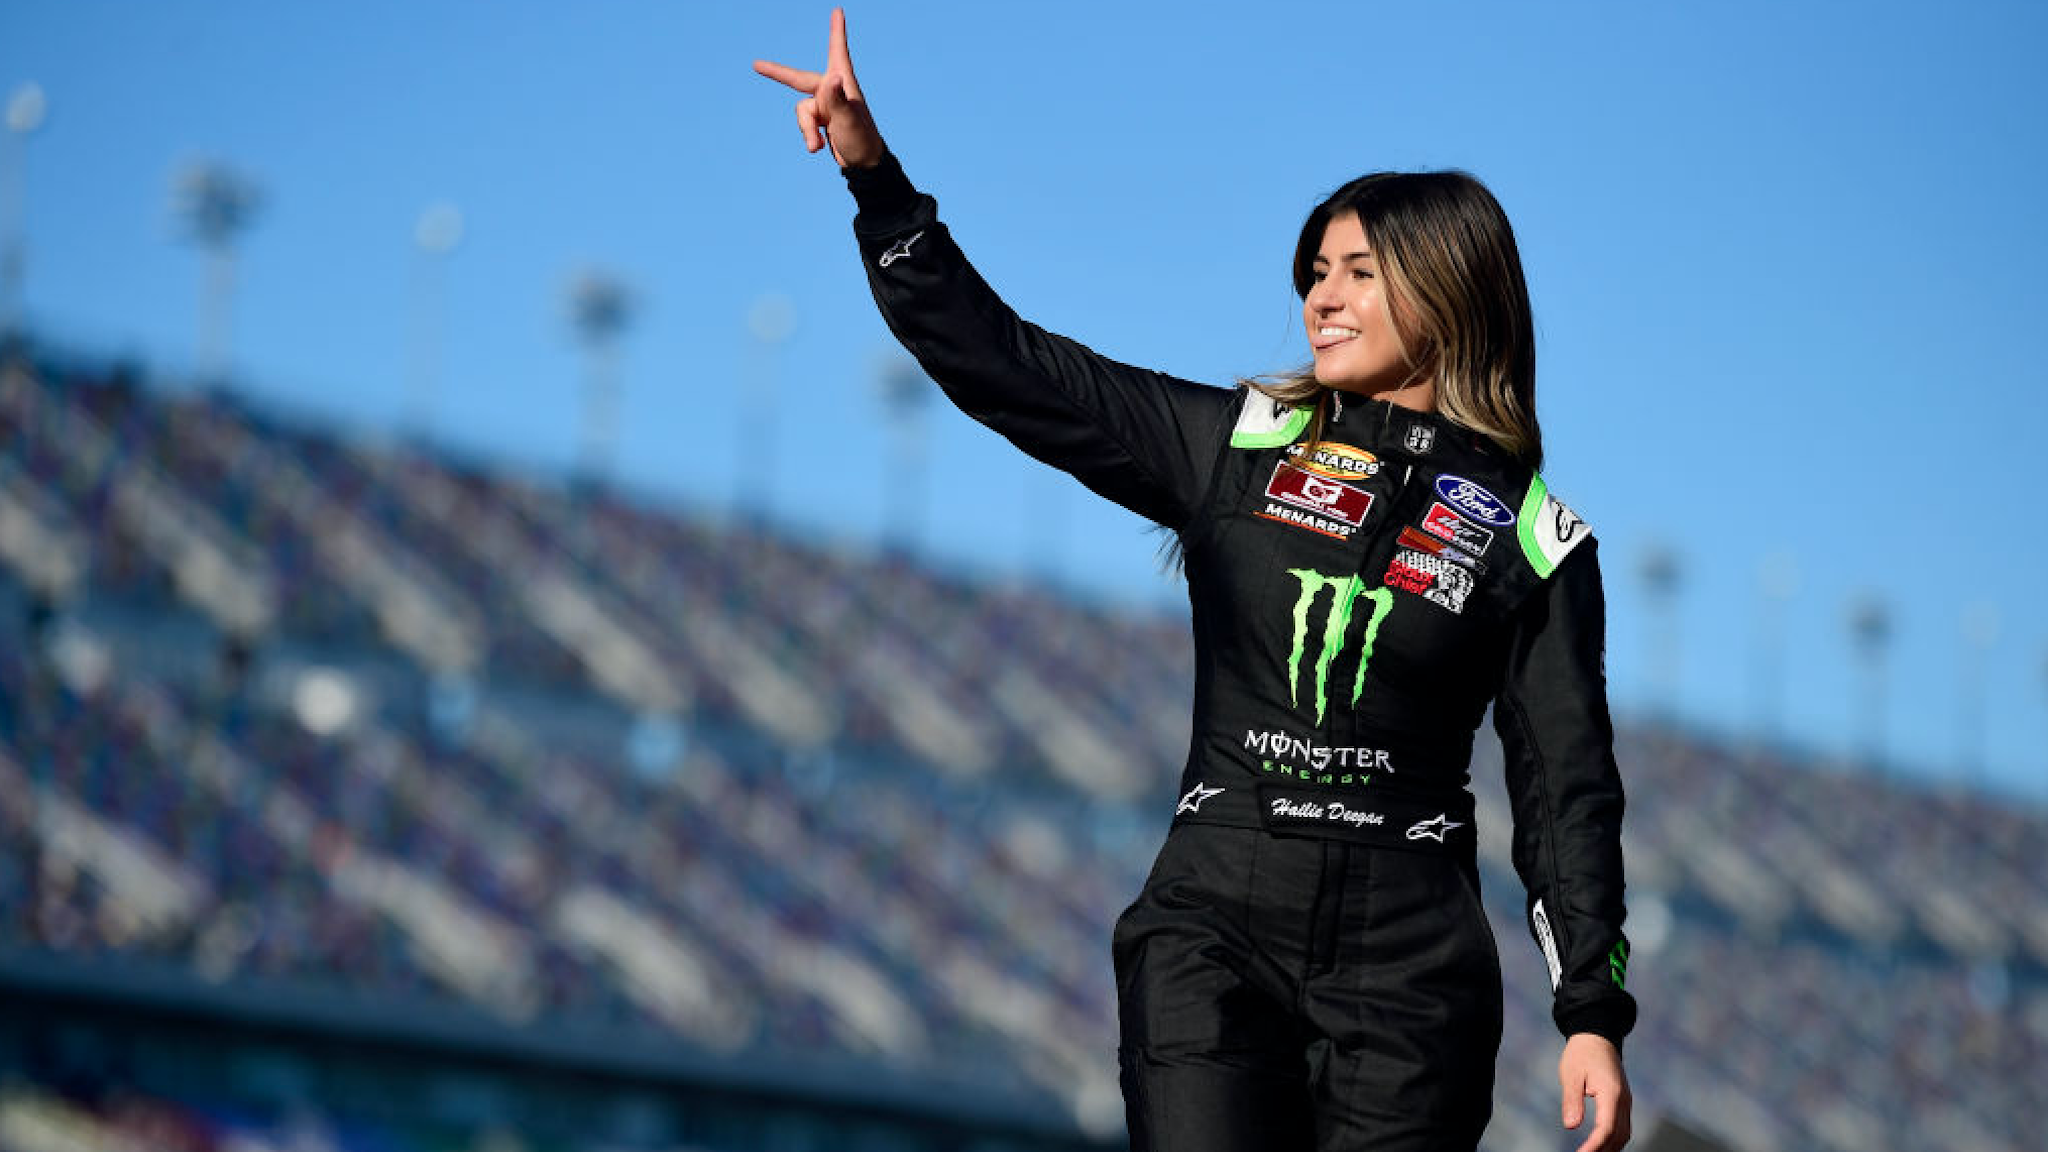 Hailie Deegan, driver of the #4 Monster Energy Ford, is introduced prior to the ARCA Menards Series Lucas Oil 200 Driven by General Tire at Daytona International Speedway on February 08, 2020 in Daytona Beach, Florida.